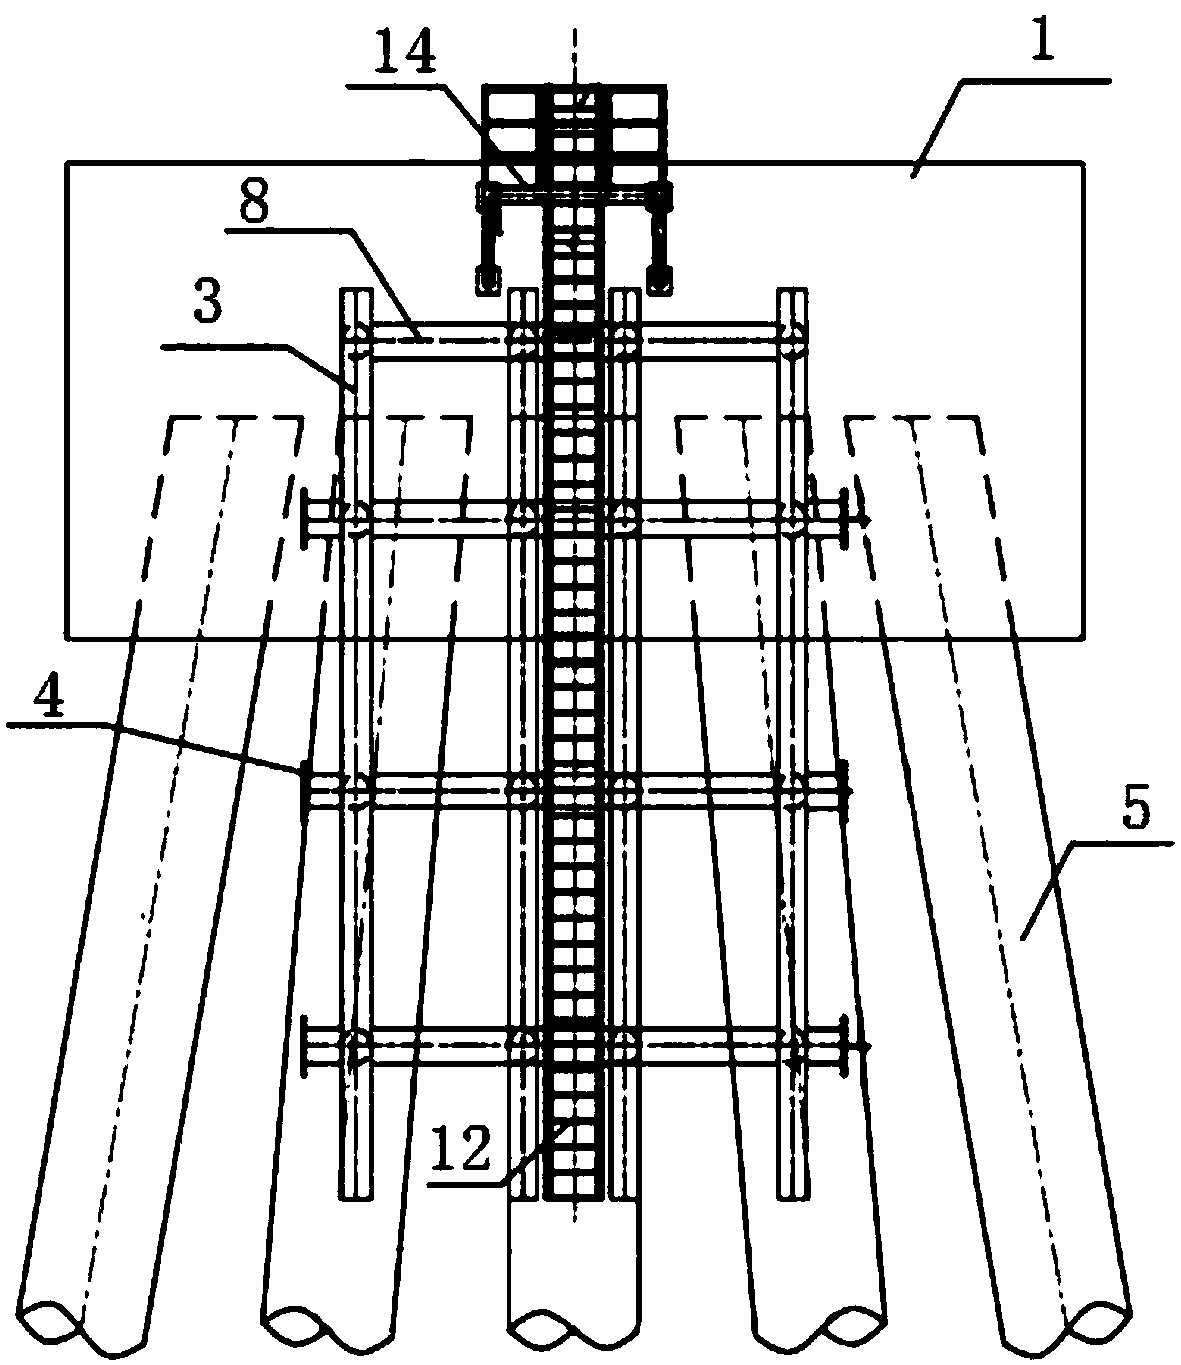 Offshore wind power high-piled cap foundation berthing system and construction method